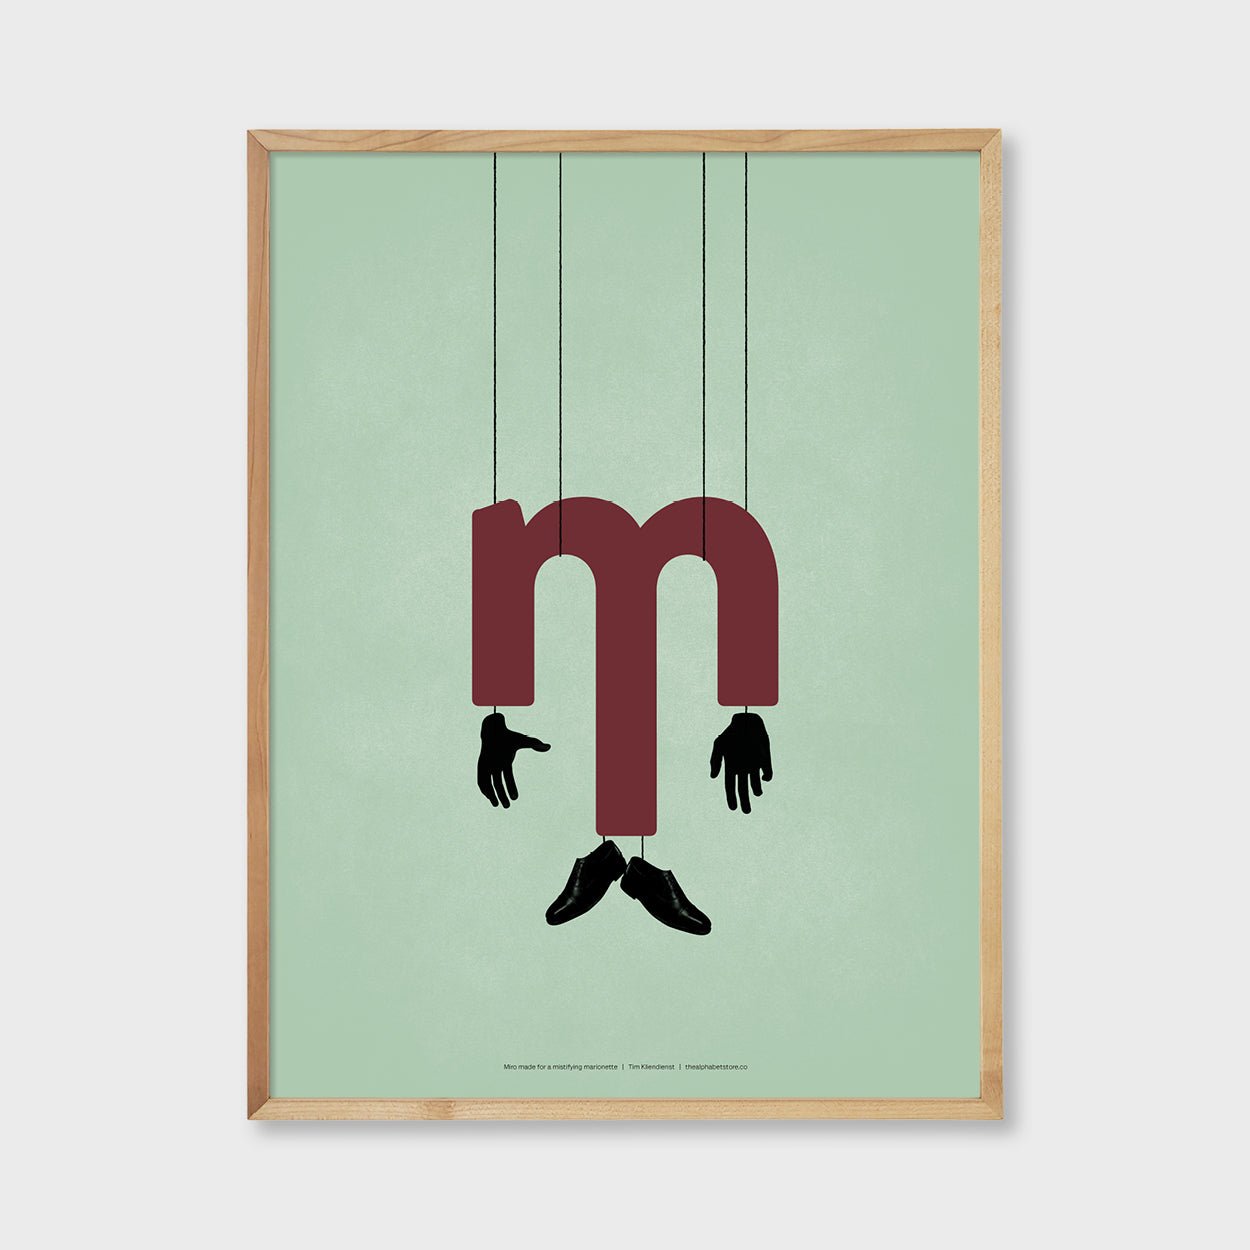 Marionette collage silhouette with hands and shoes on a string